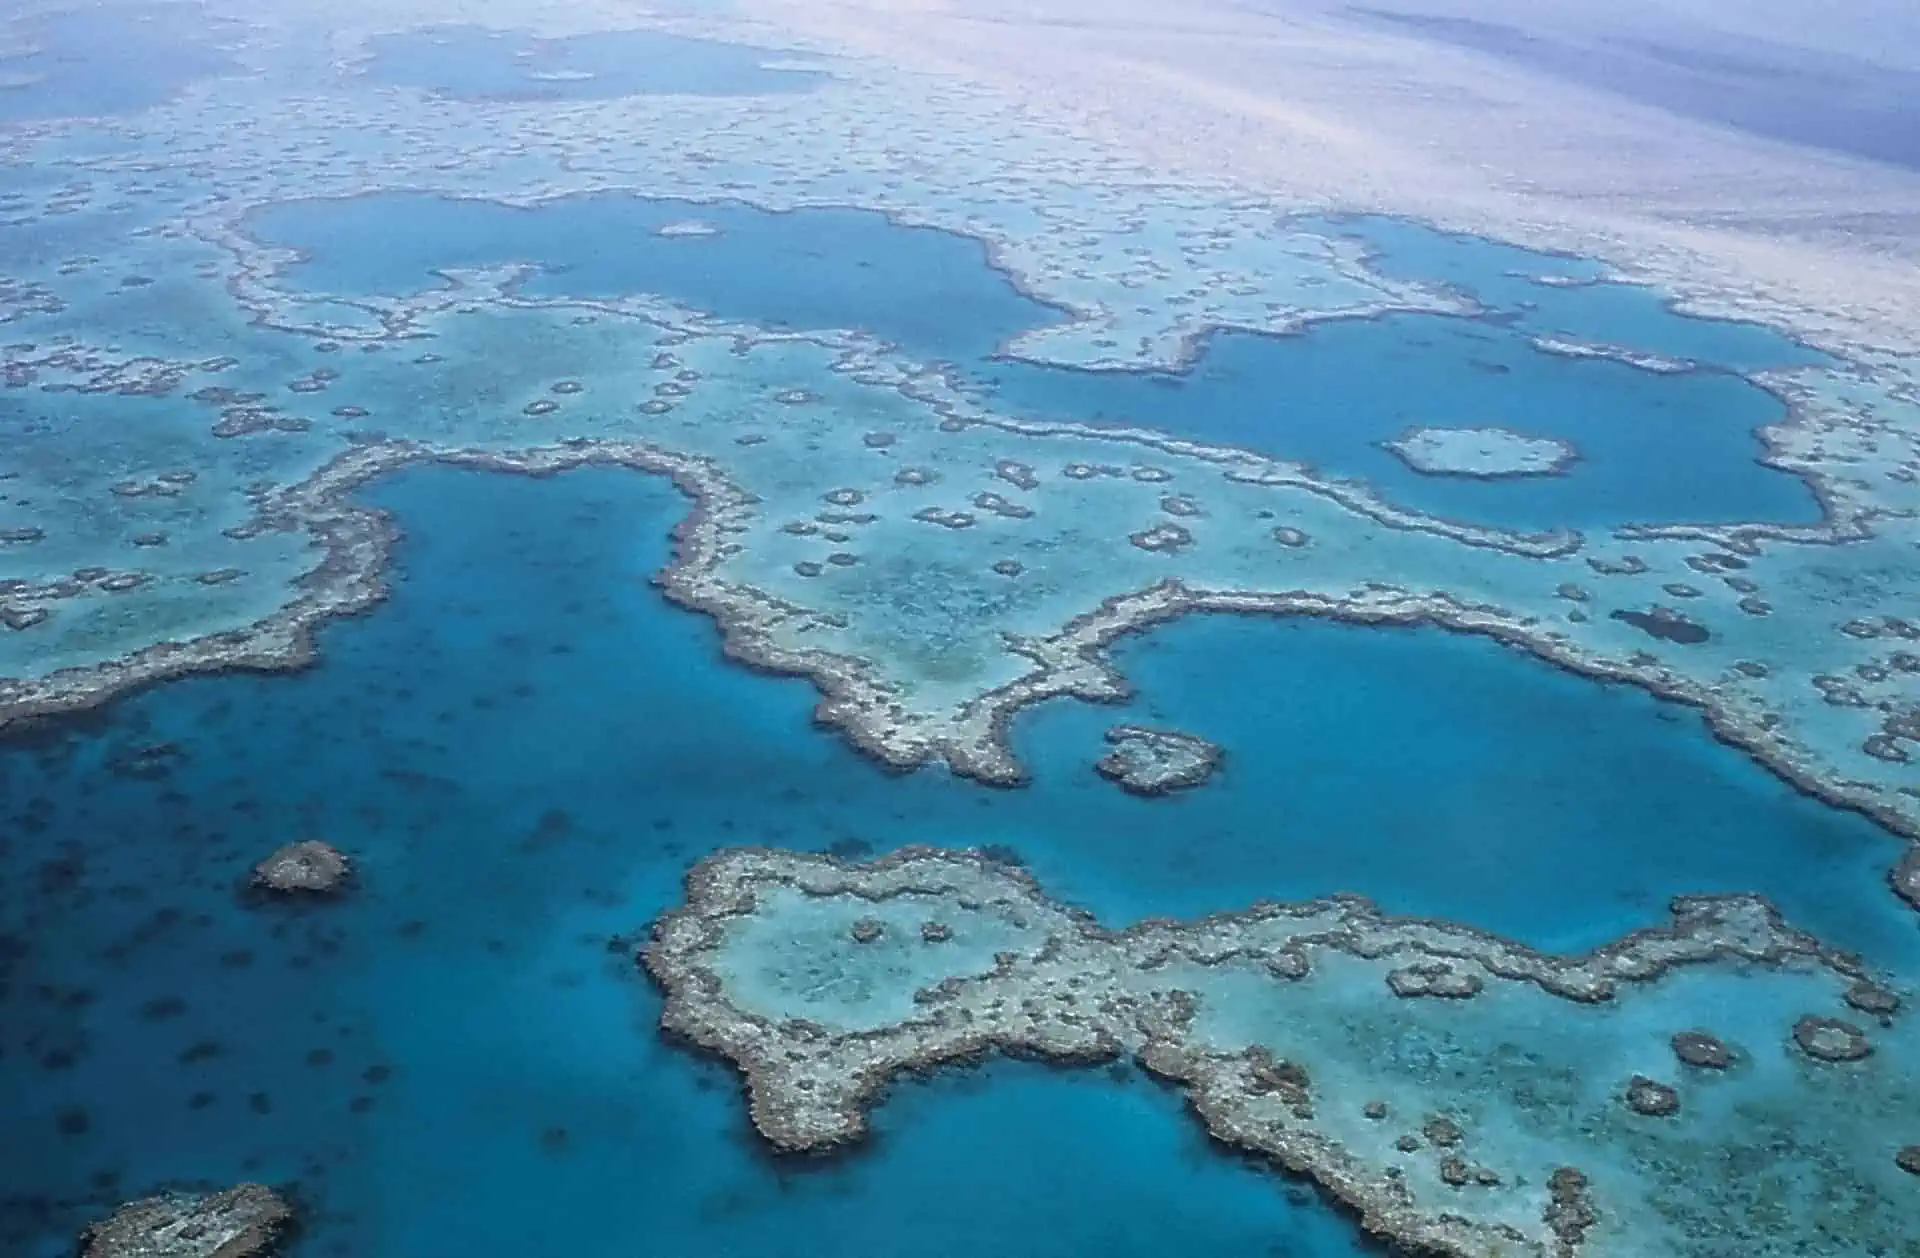 Great Barrier Reef in at the East coast of Australia.